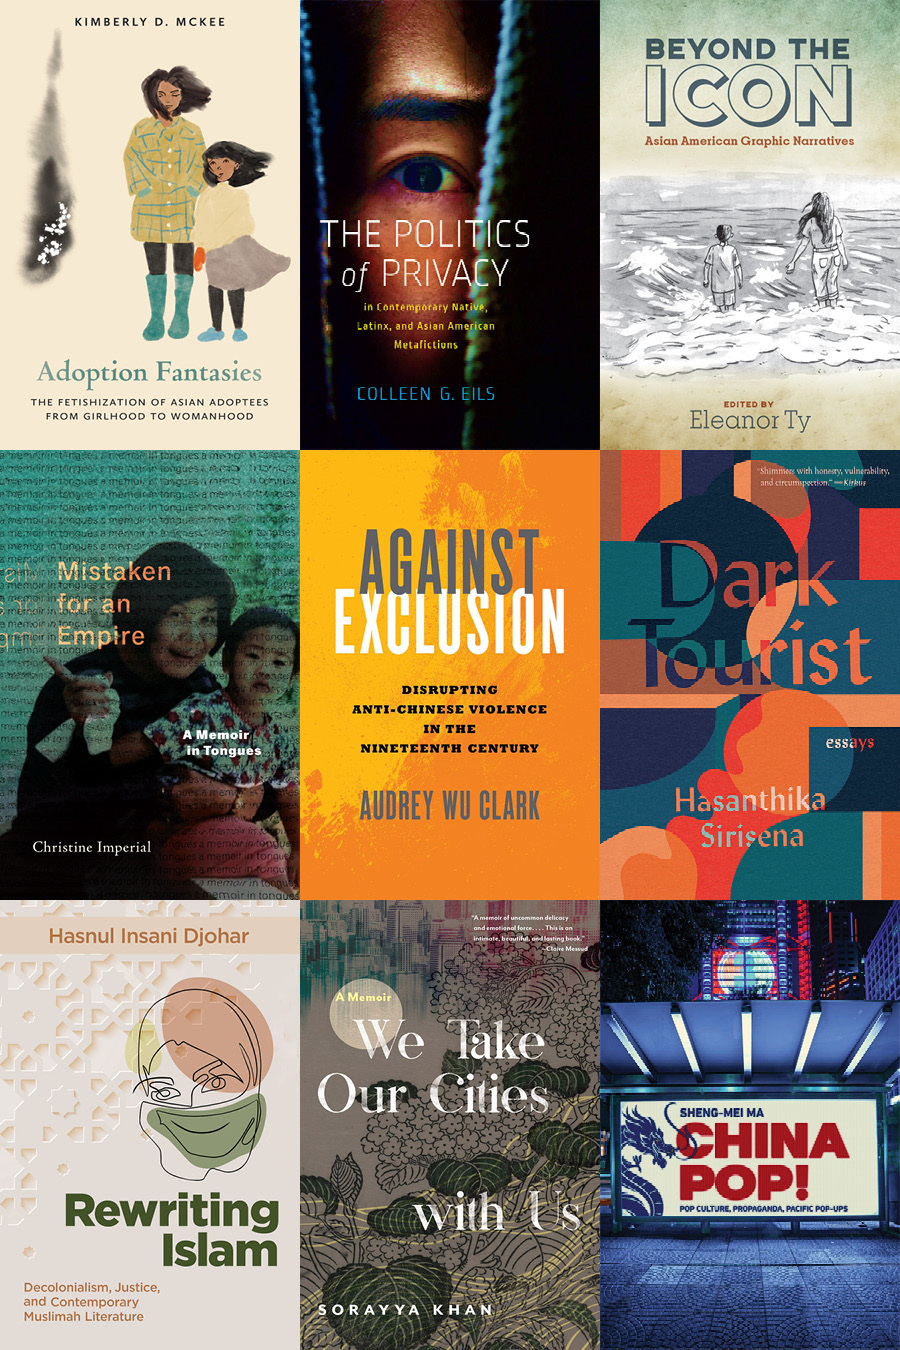 A collage of book covers features nine Ohio State Press titles in Asian and Asian American studies, showing the range of the Press's output.